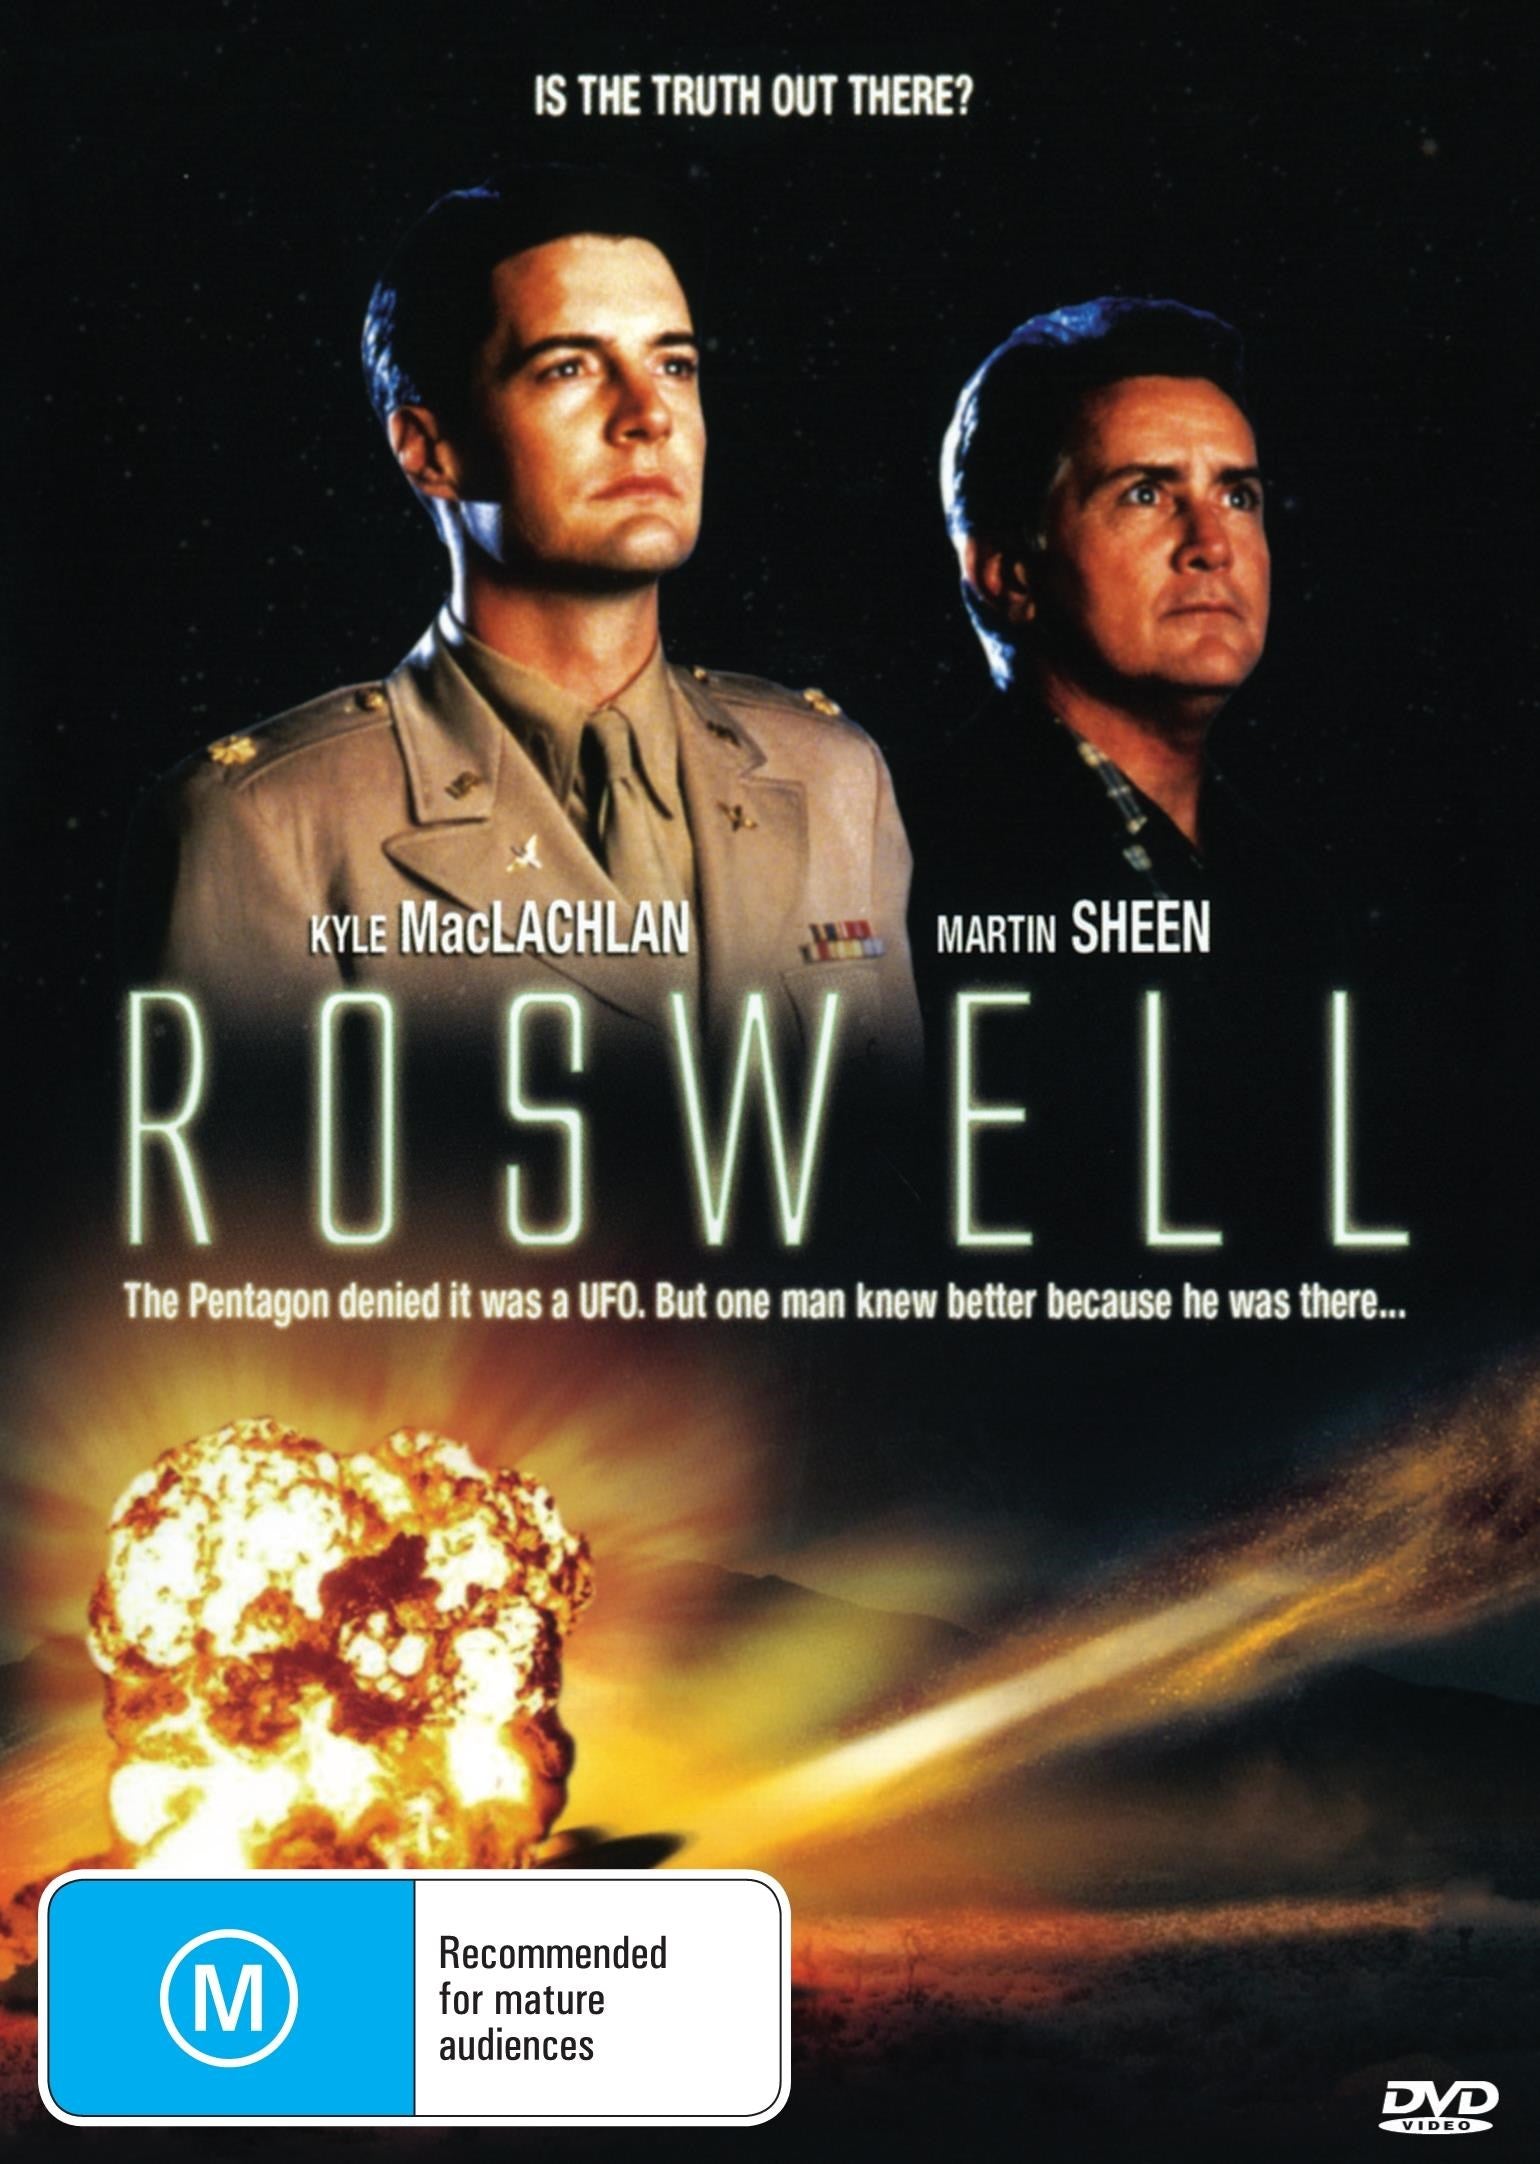 Roswell rareandcollectibledvds